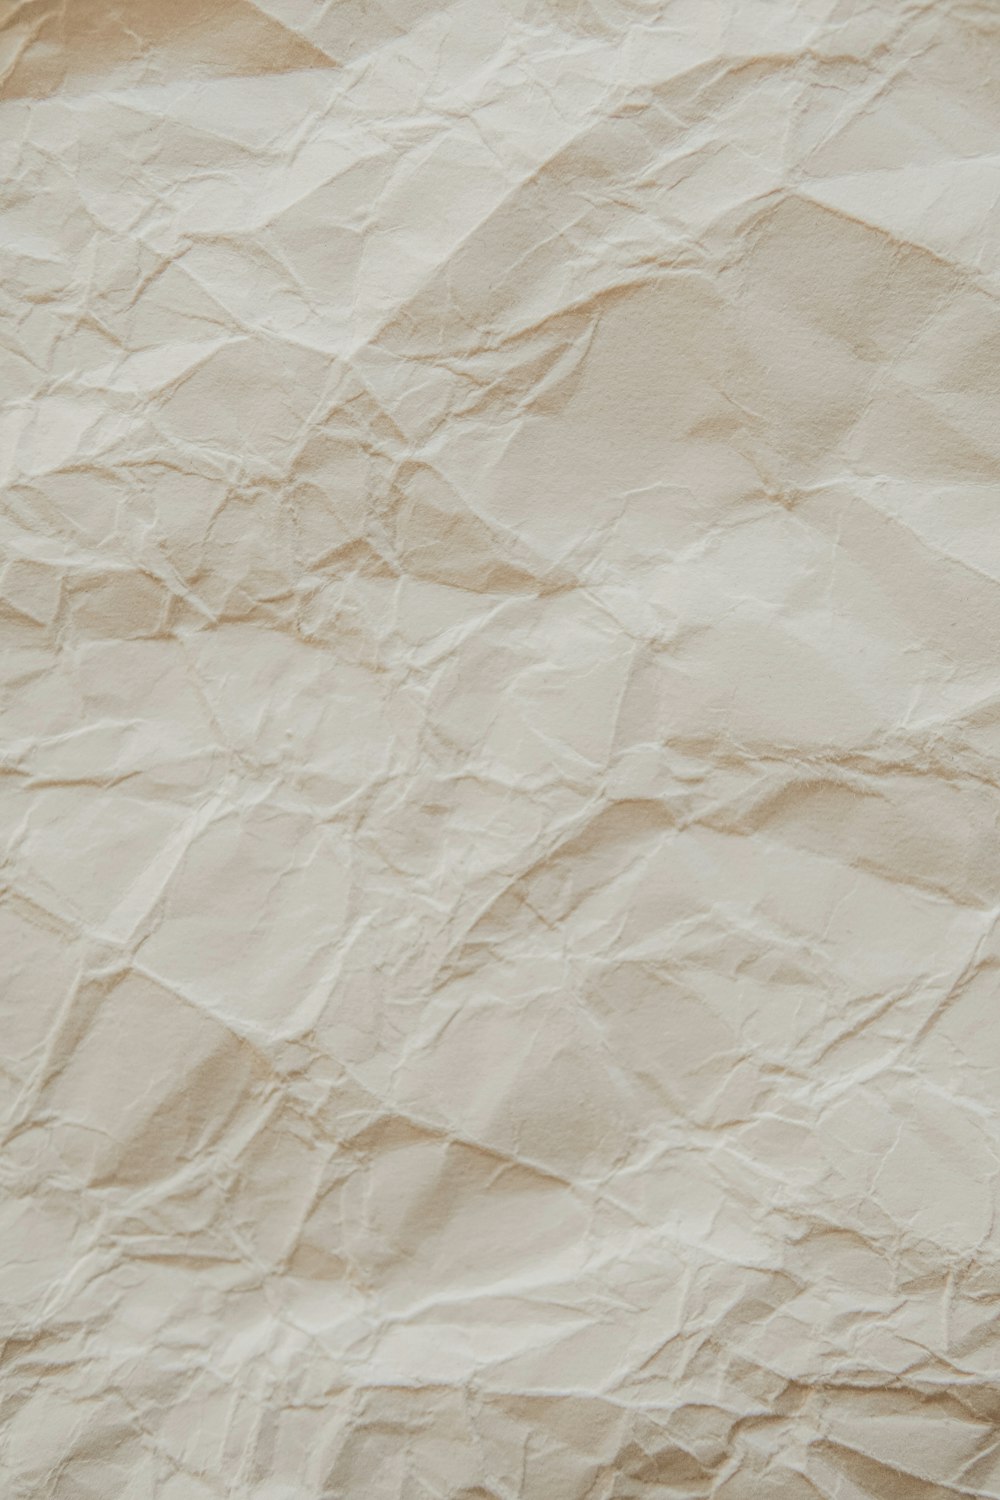 30k+ Old Paper Texture Pictures  Download Free Images on Unsplash